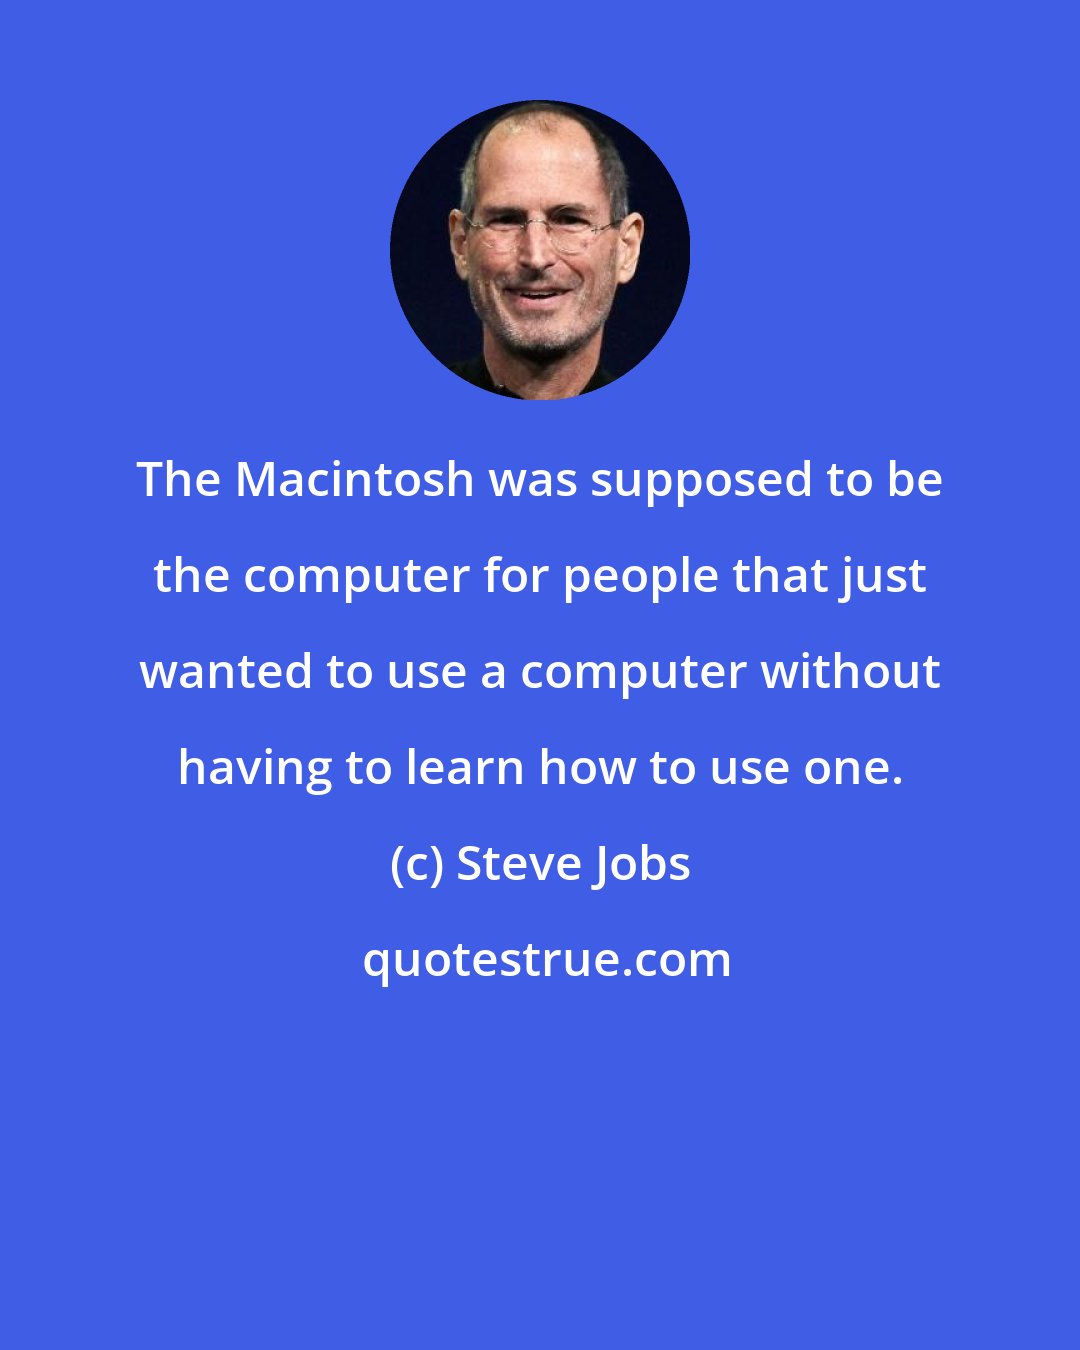 Steve Jobs: The Macintosh was supposed to be the computer for people that just wanted to use a computer without having to learn how to use one.